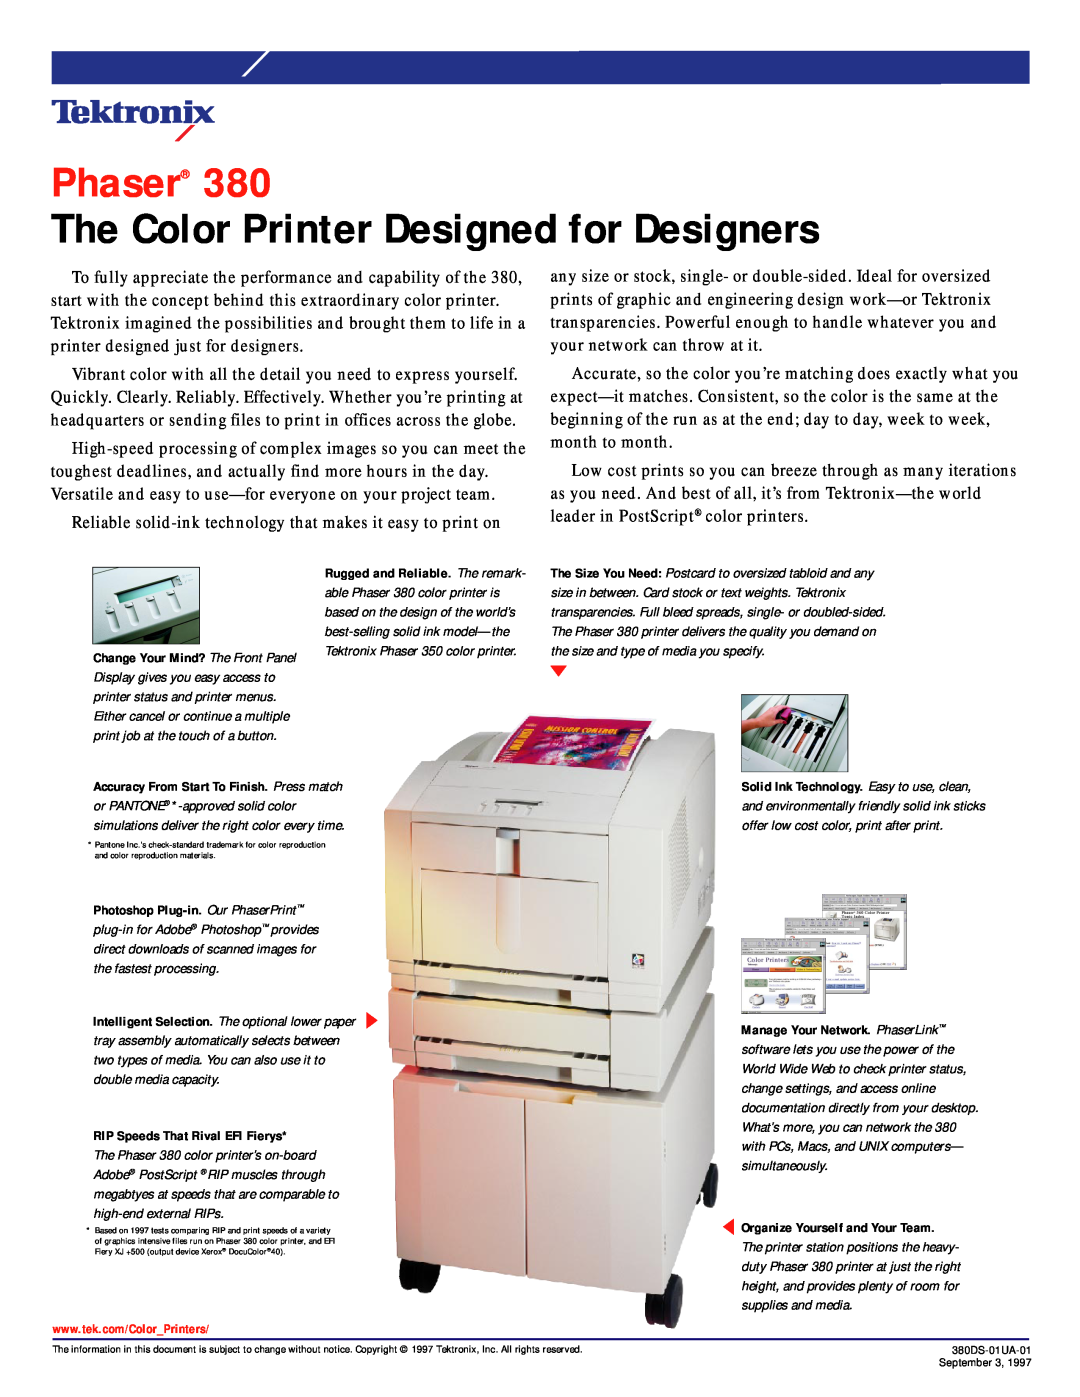 Xerox 380 manual Phaser, The Color Printer Designed for Designers 